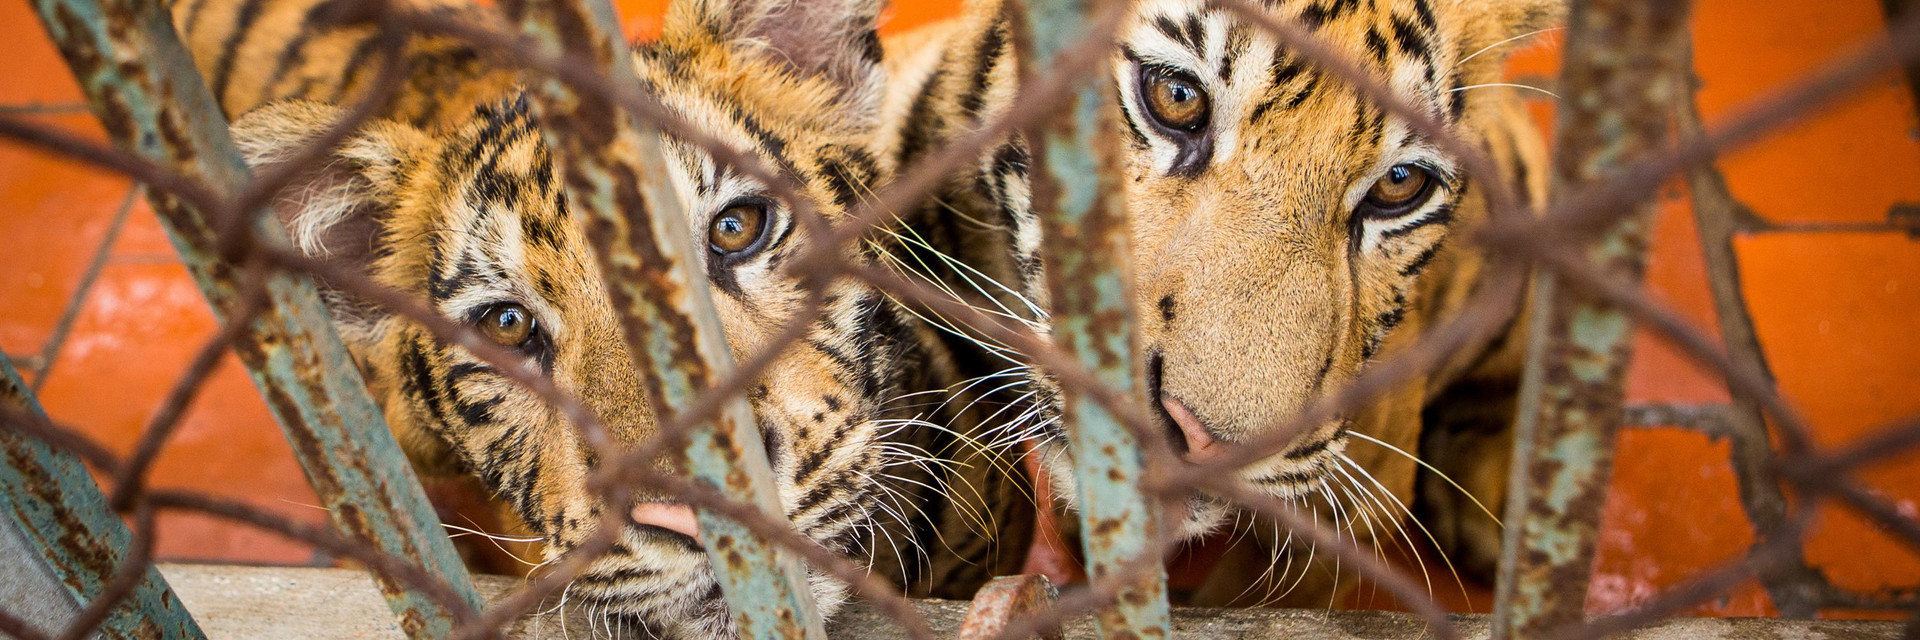 tigers being farmed in captivity